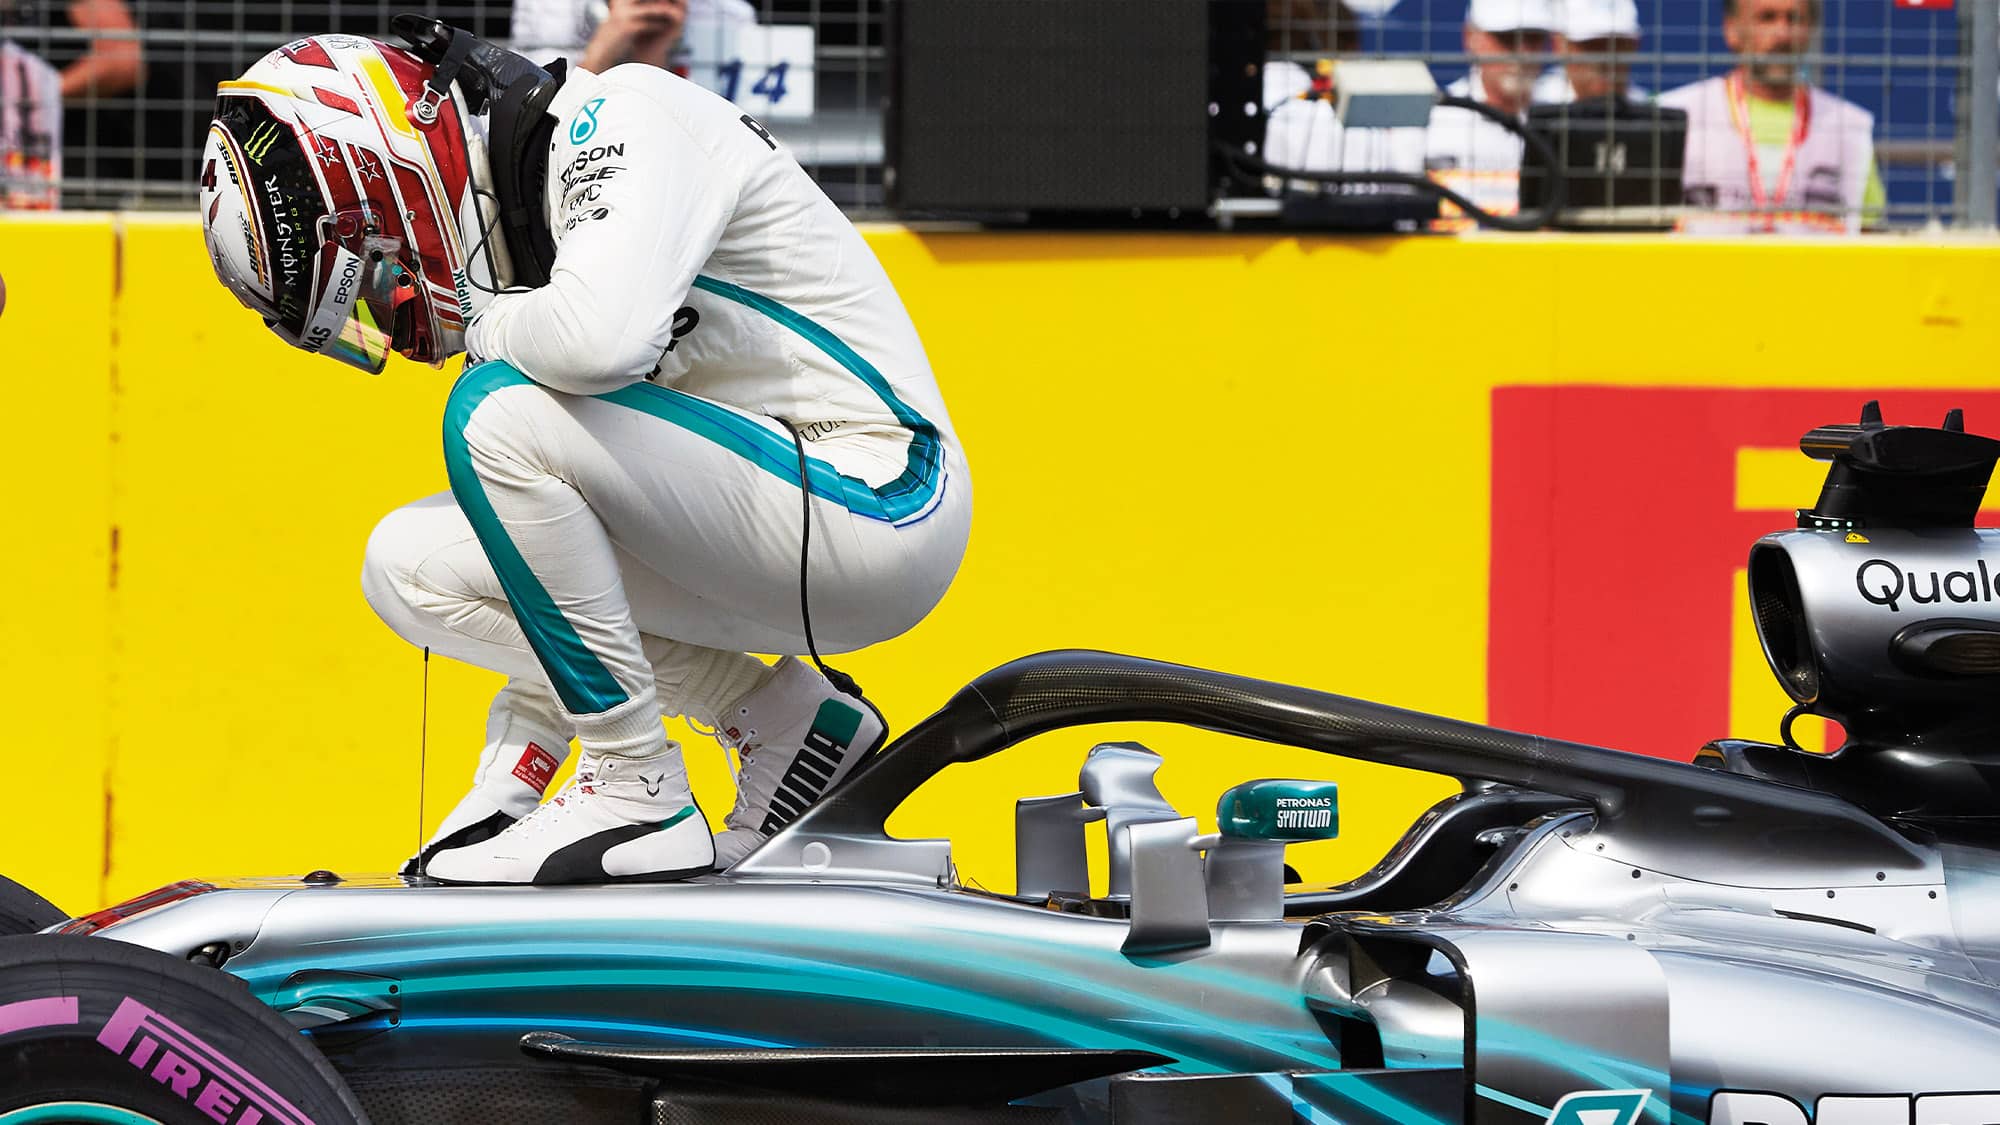 Lewis Hamilton crouches on his car after the 2018 French Grand Prix